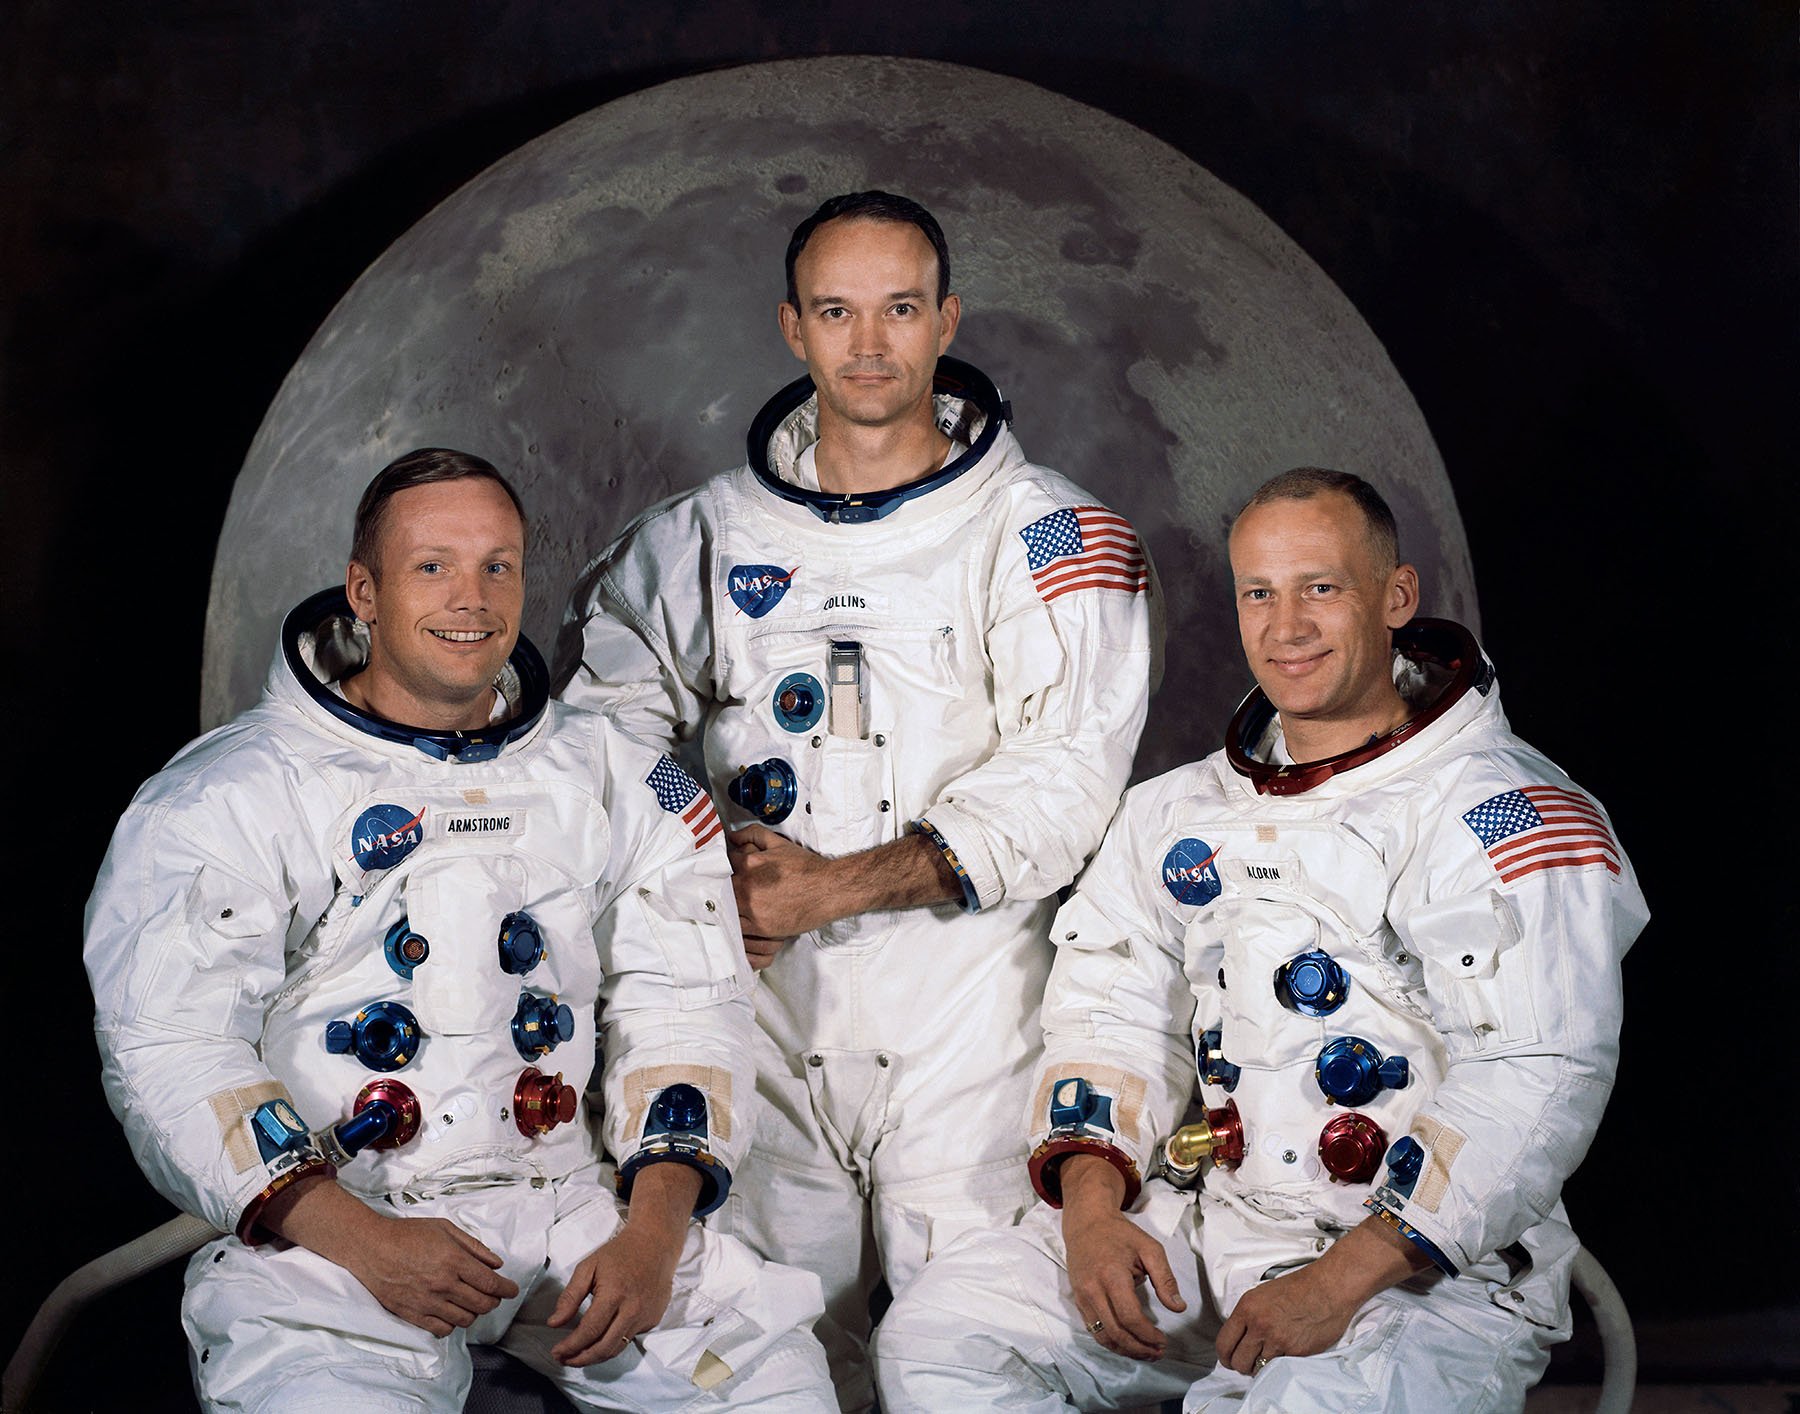 Official crew photo of the Apollo 11 Prime Crew. From left to right are astronauts Neil A. Armstrong, Commander; Michael Collins, Command Module Pilot; and Edwin E. Aldrin Jr., Lunar Module Pilot. Image credit: NASA